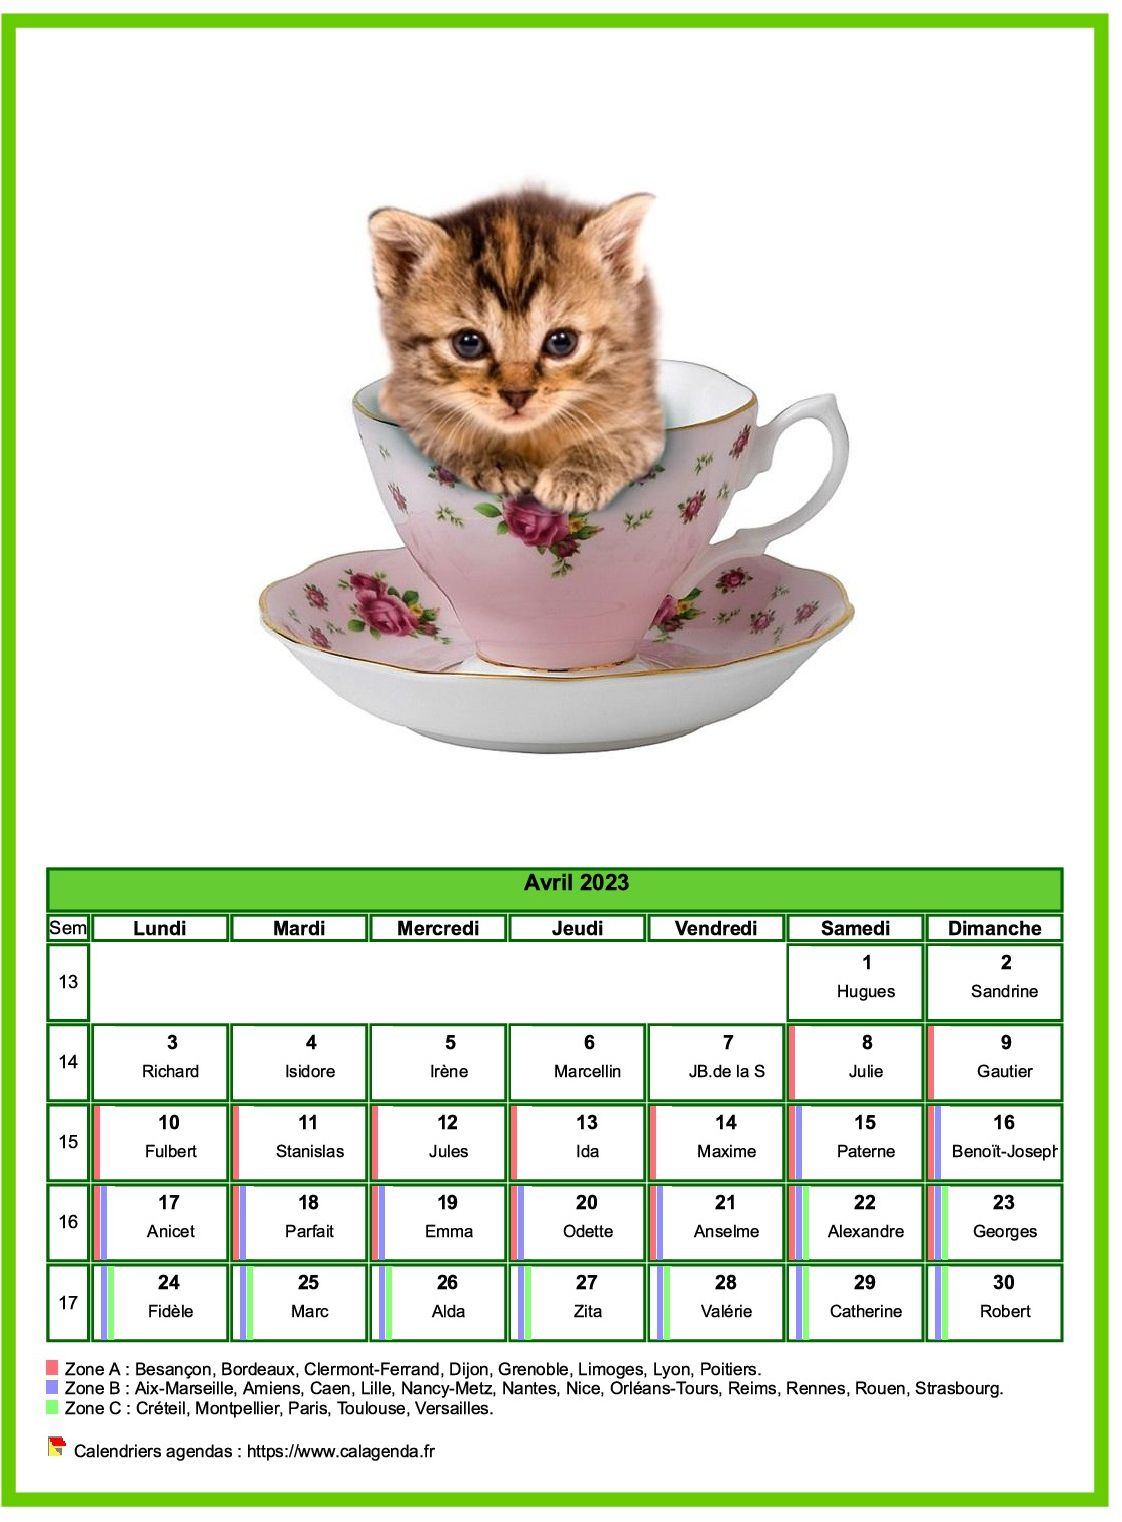 Calendrier avril 2023 chats